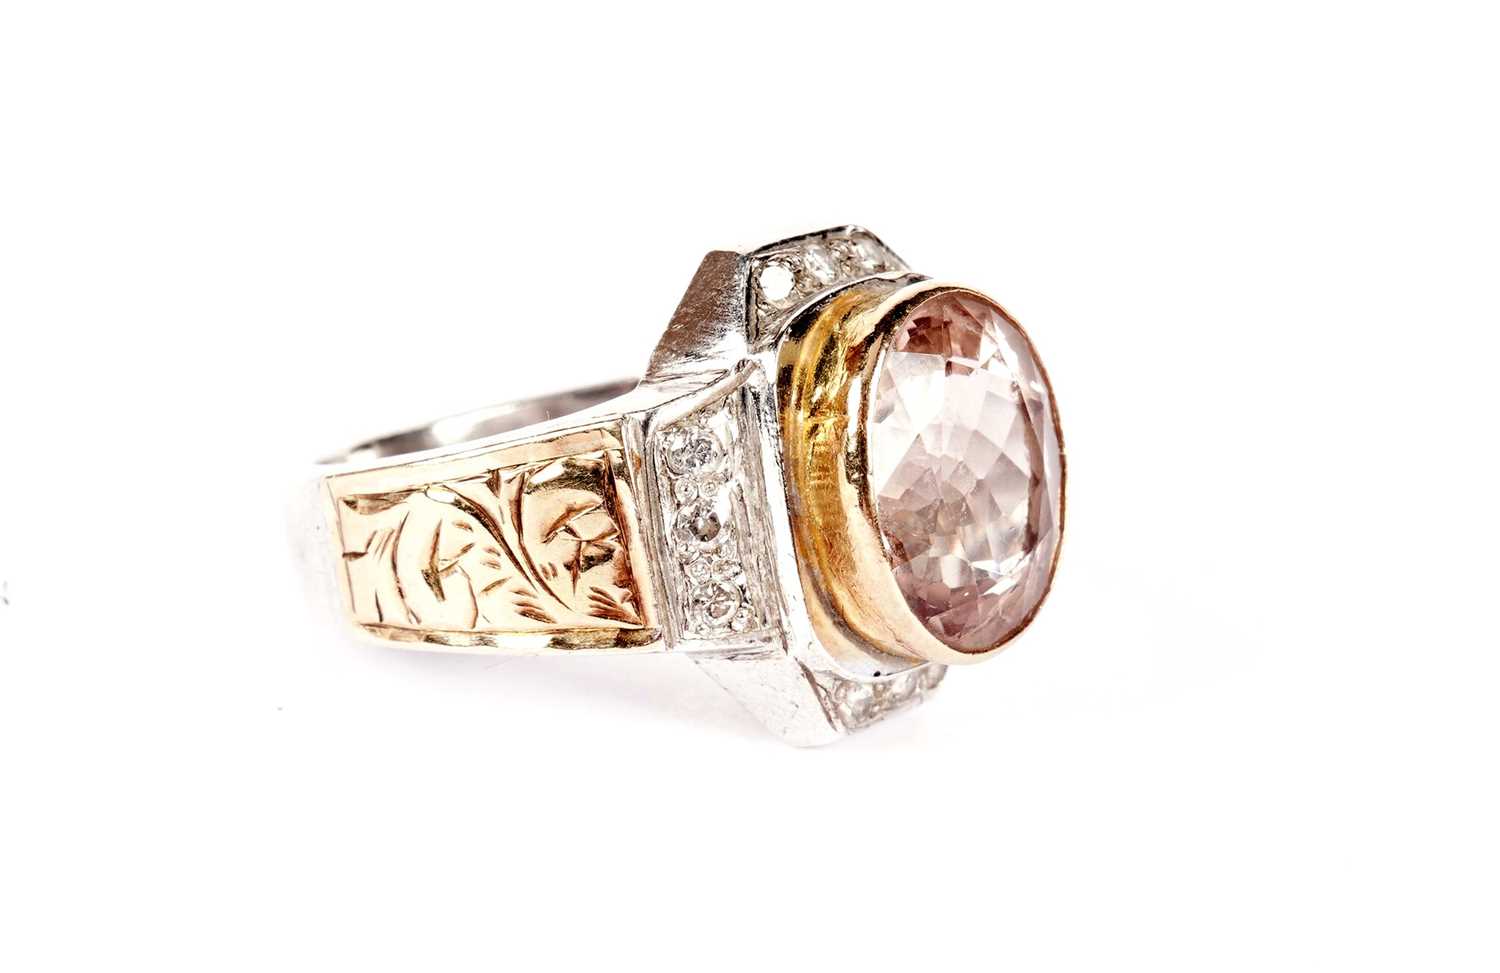 A pink-topaz and diamond dress ring - Image 2 of 3